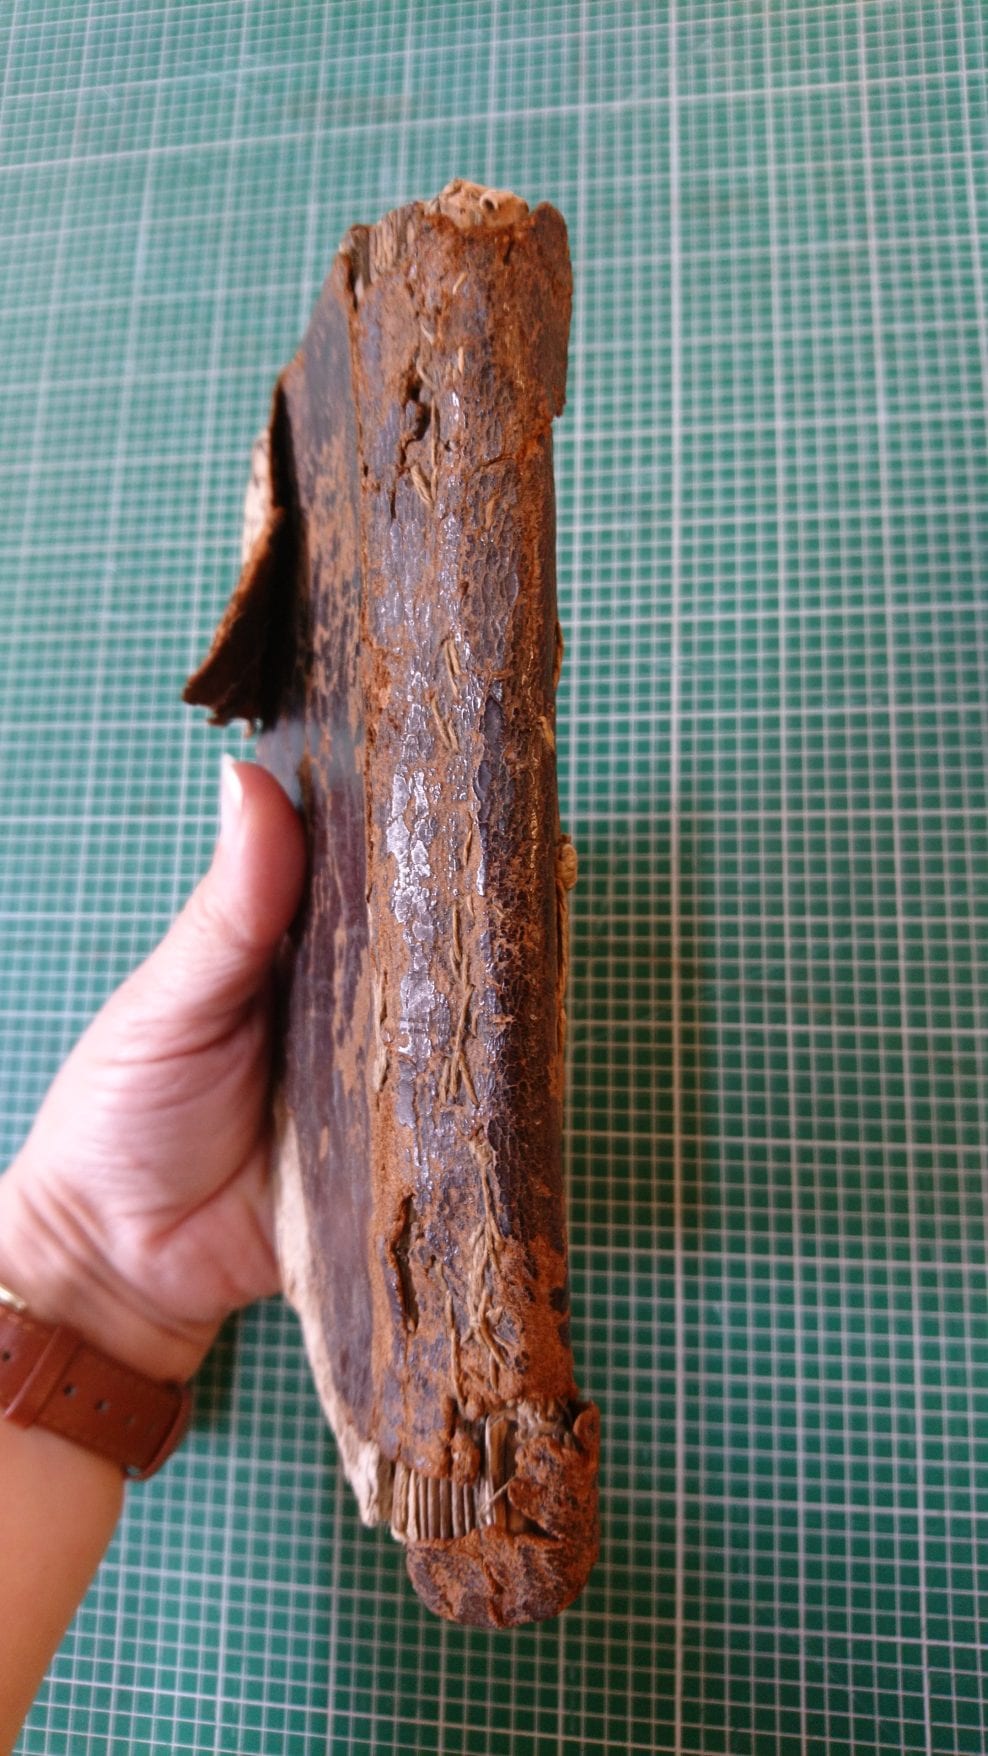 Spine before conservation